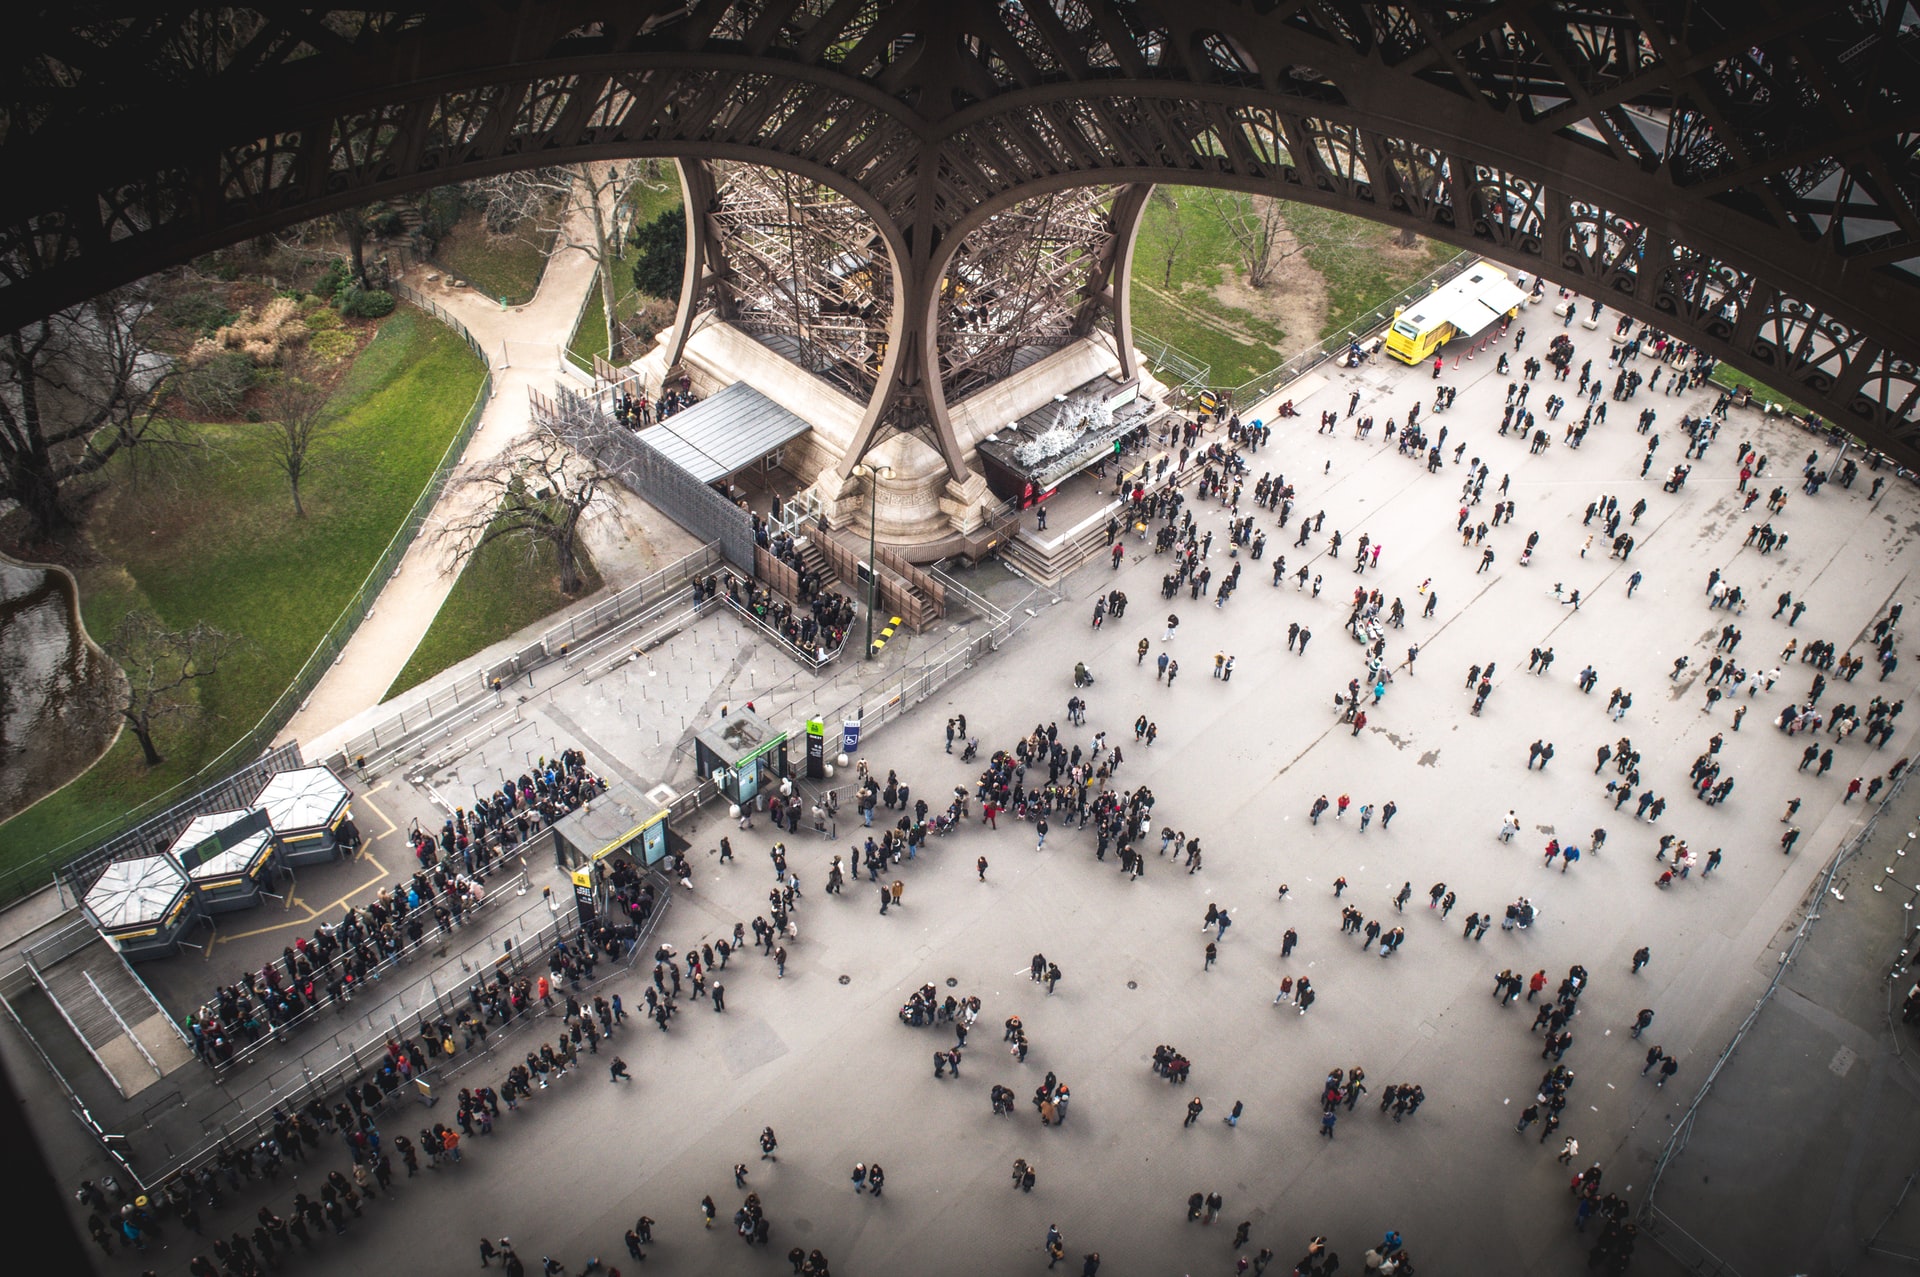 View of the forecourt below the Eiffel Tower from the first floor